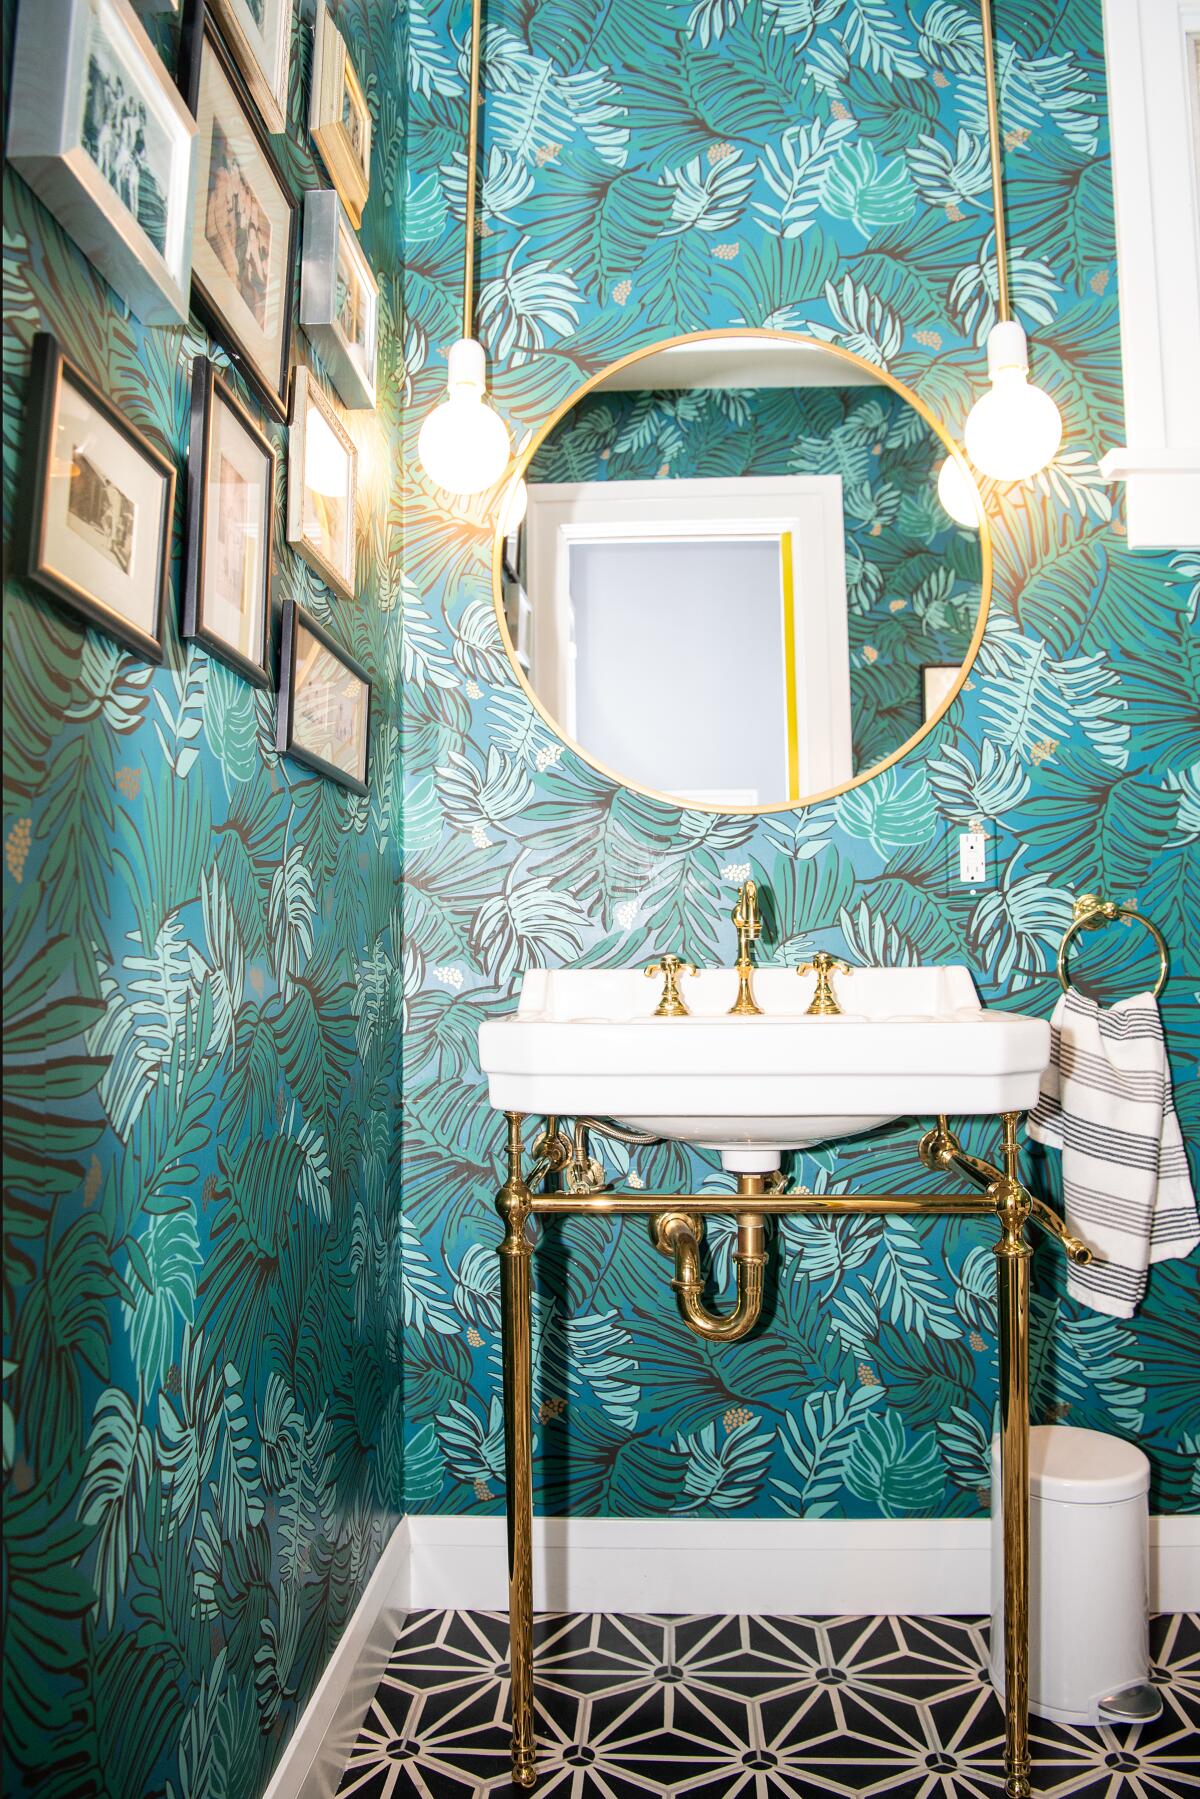 A salon wall in the powder room. The blue leaf-covered wallpaper is by Justina Blakeney.